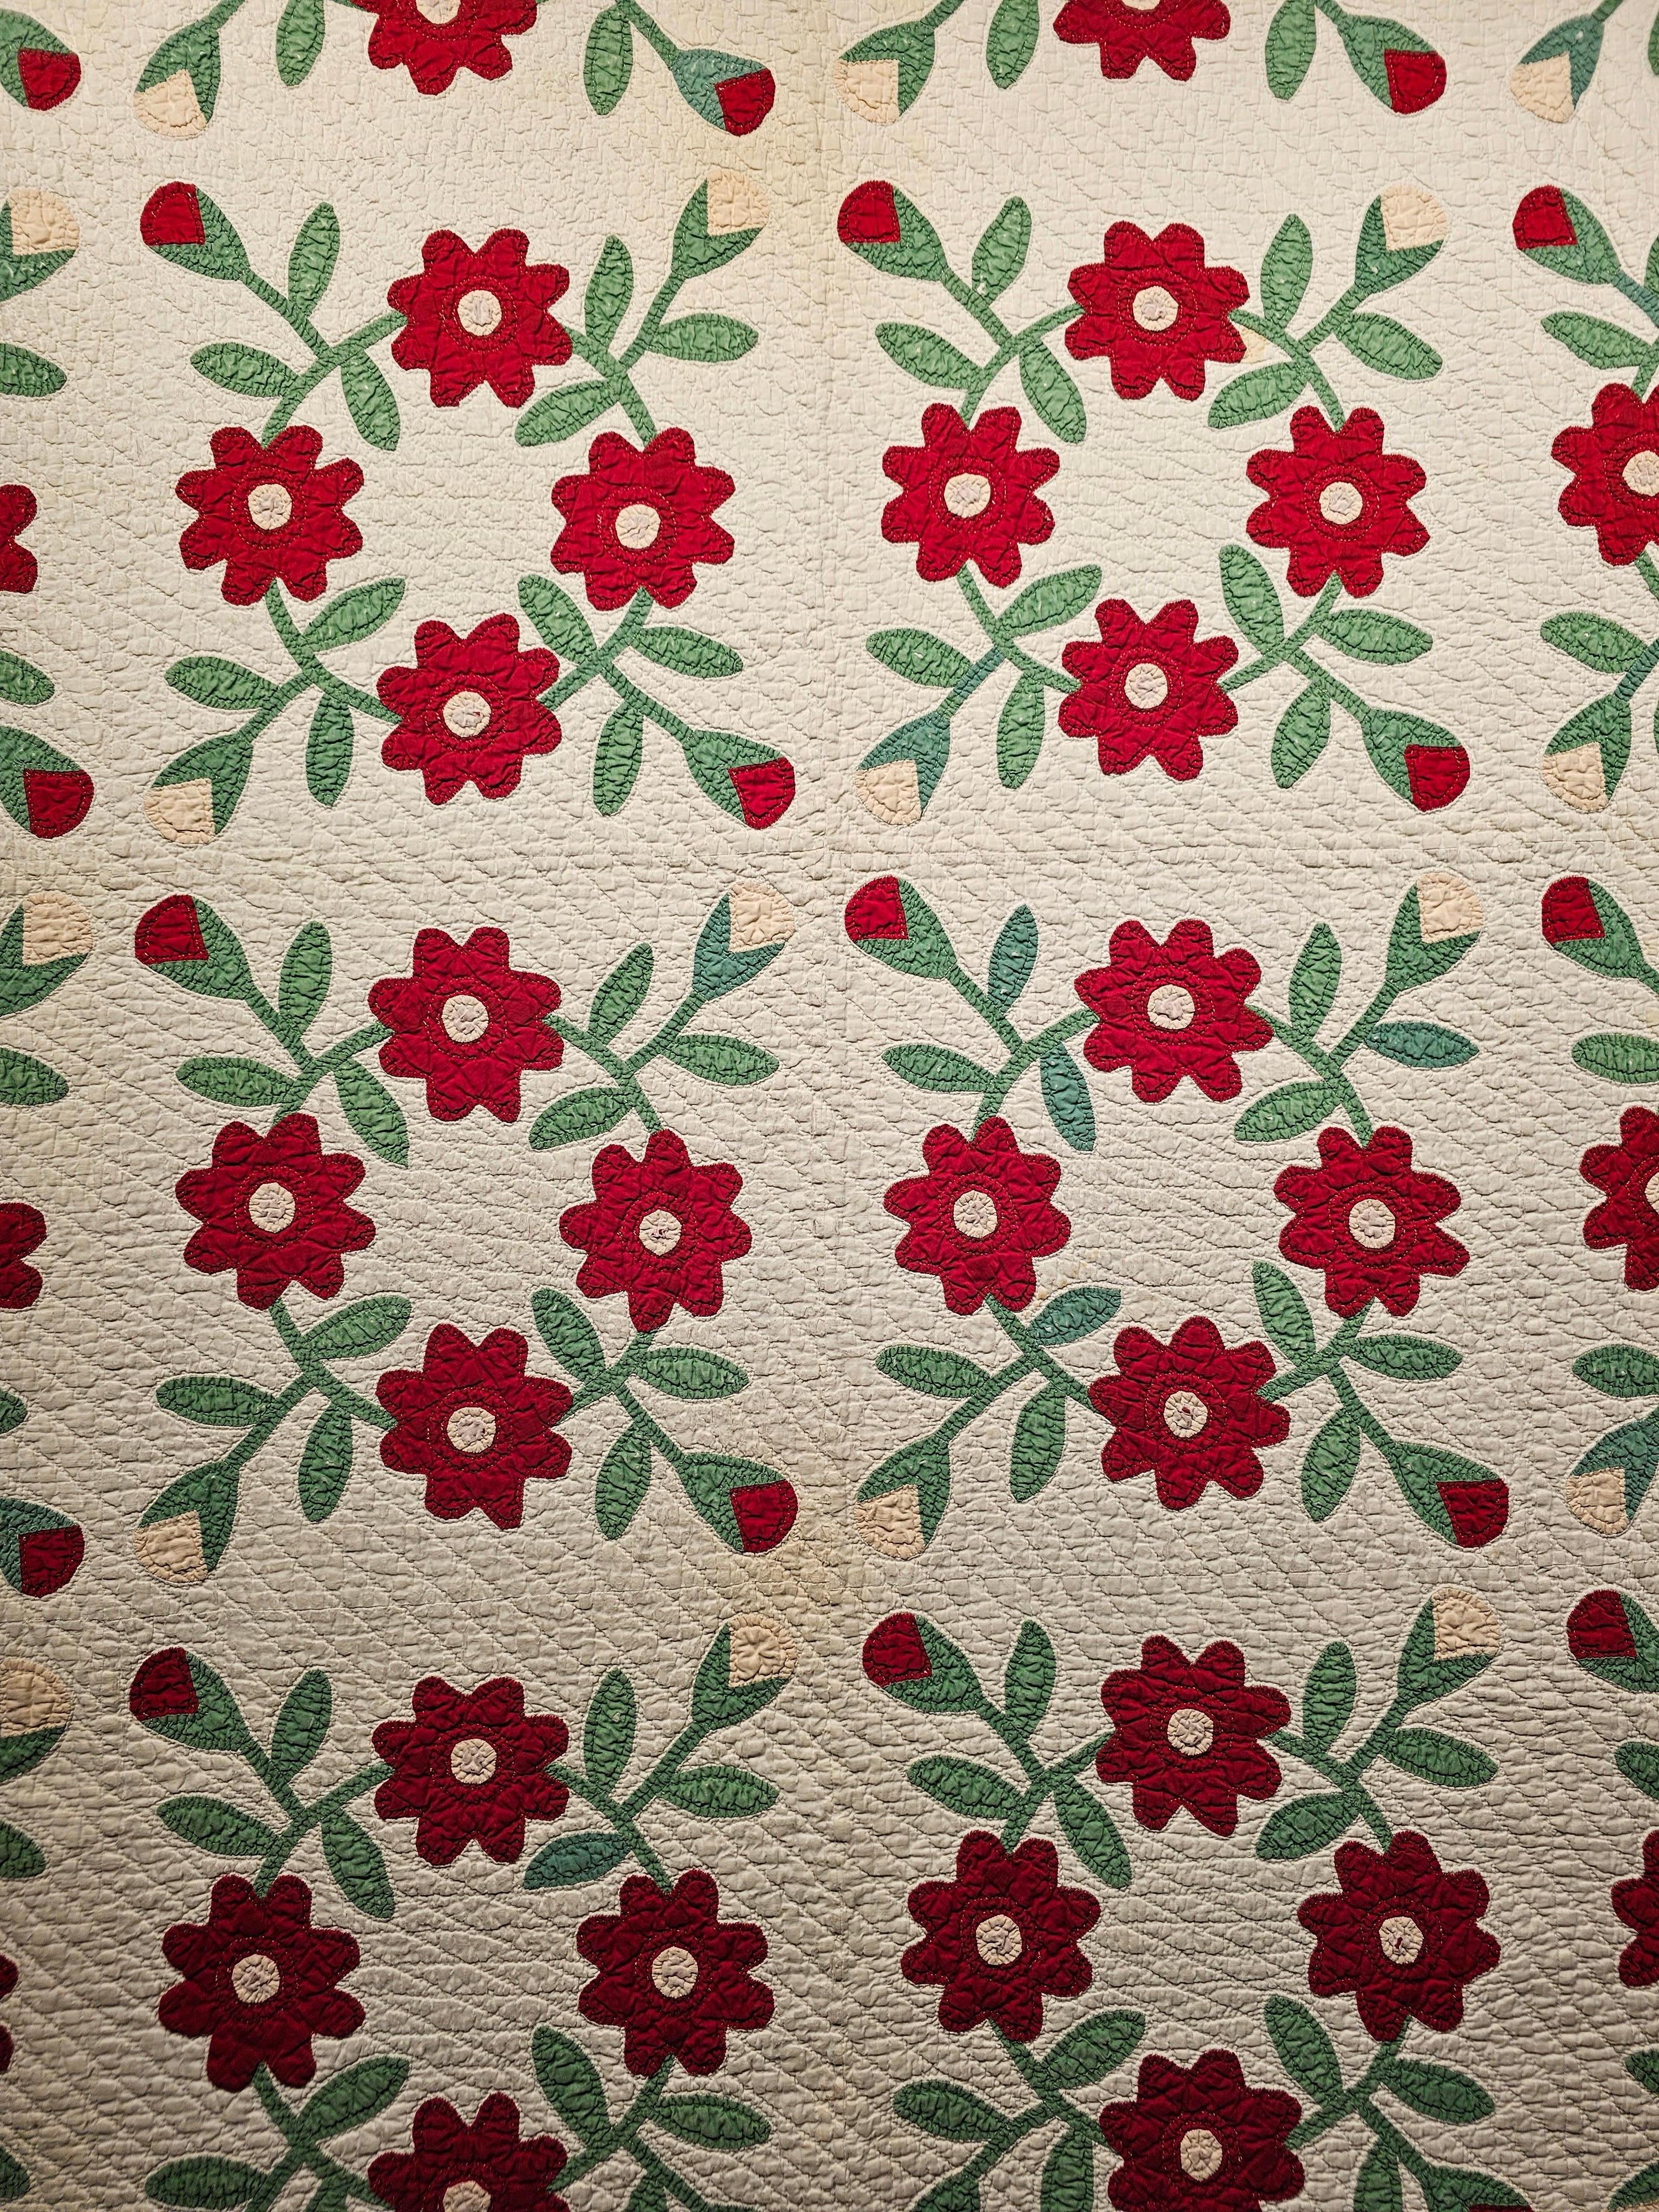 Appliqué 19th Century American Applique Quilt in Floral Pattern from Pennsylvania For Sale